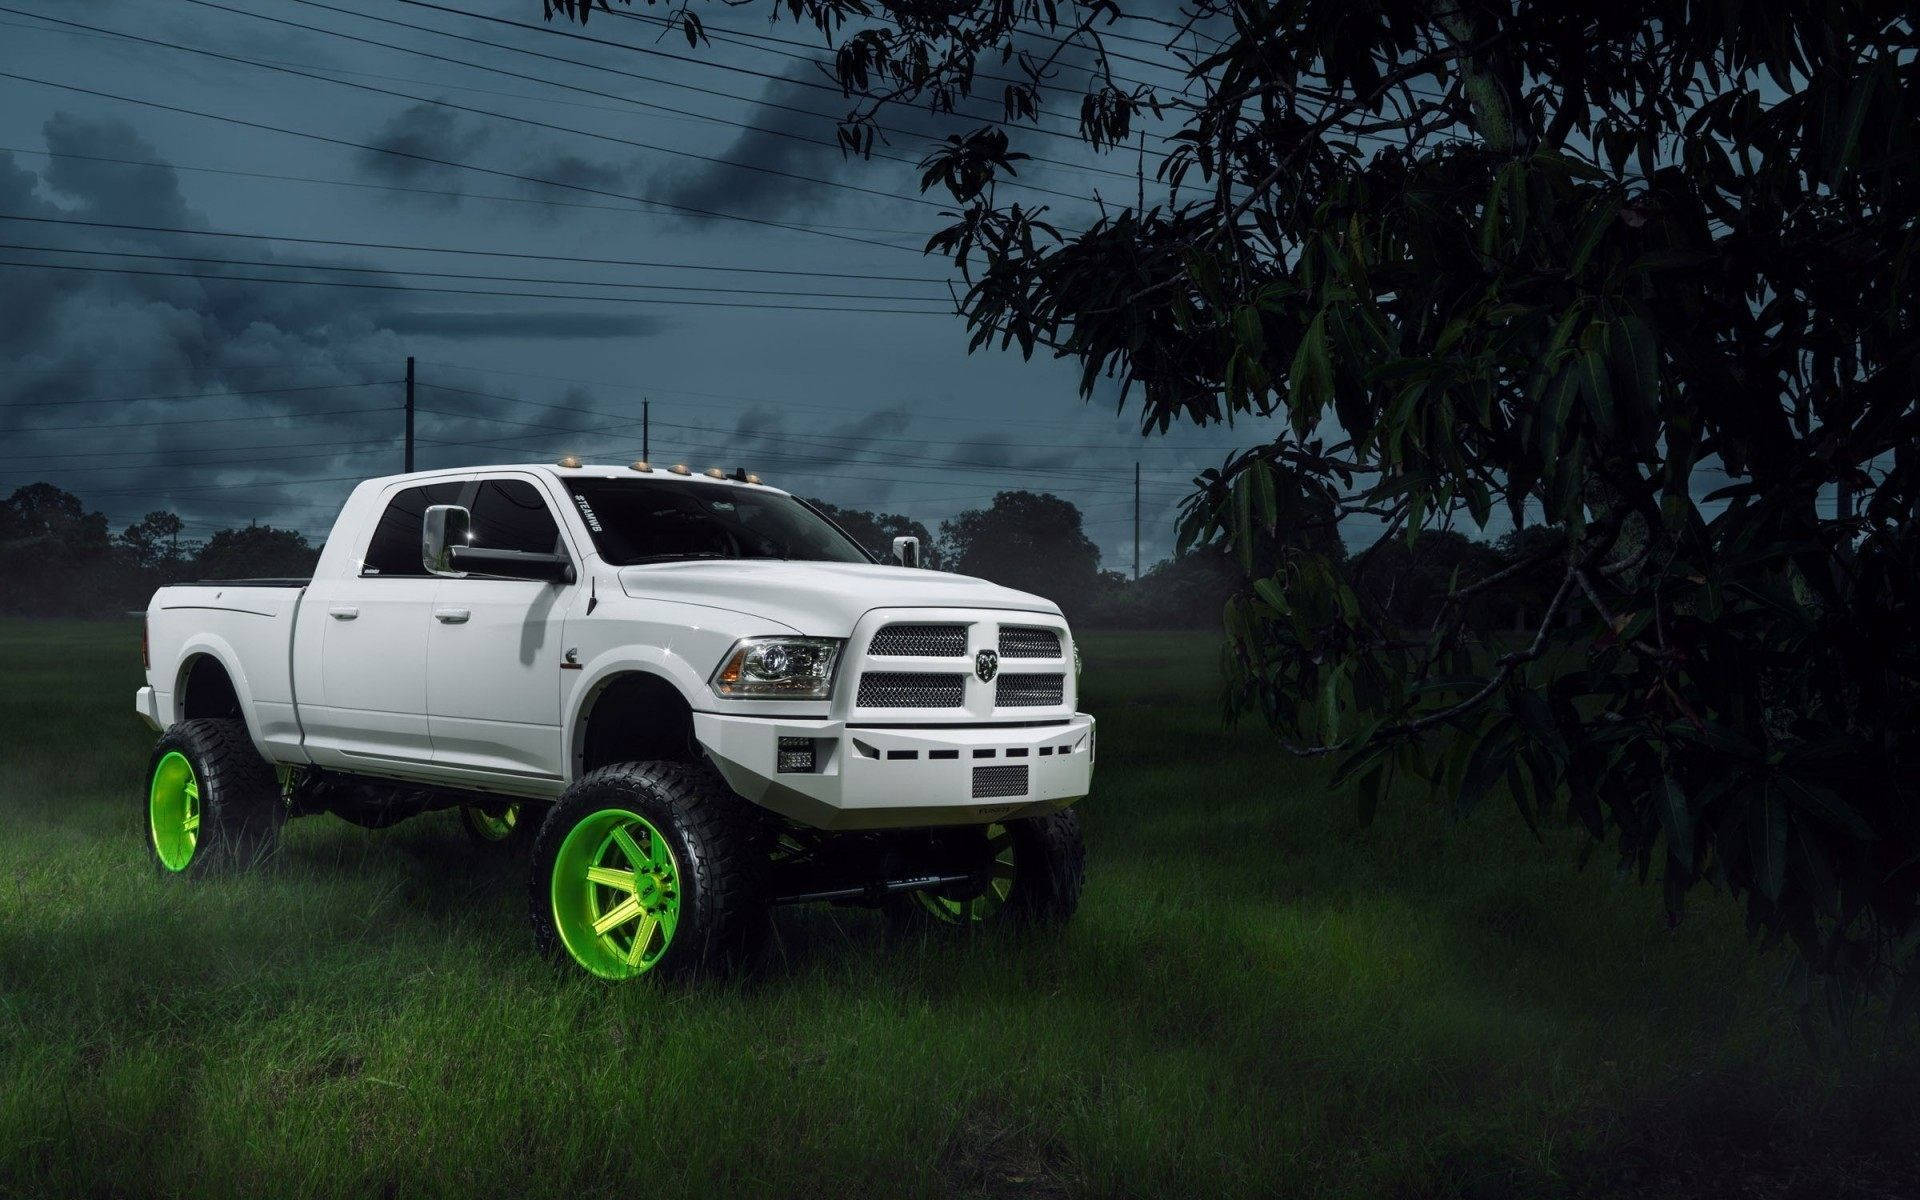 Stunning Green Cool Truck Showcasing Power and Style Wallpaper